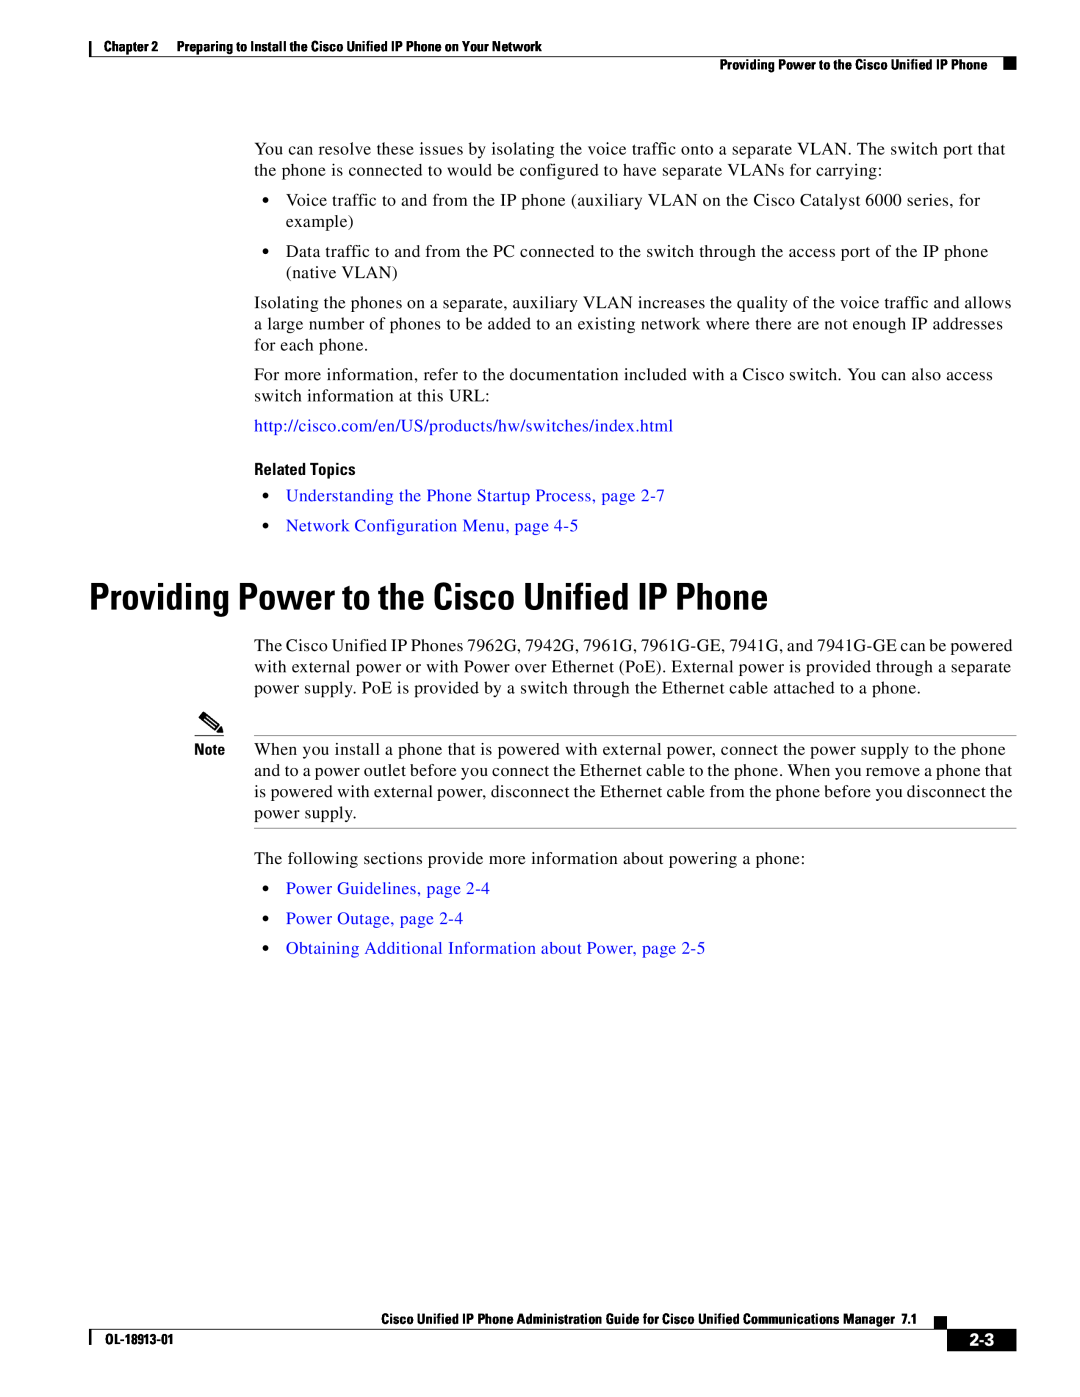 Cisco Systems 71 Providing Power to the Cisco Unified IP Phone, http//cisco.com/en/US/products/hw/switches/index.html 